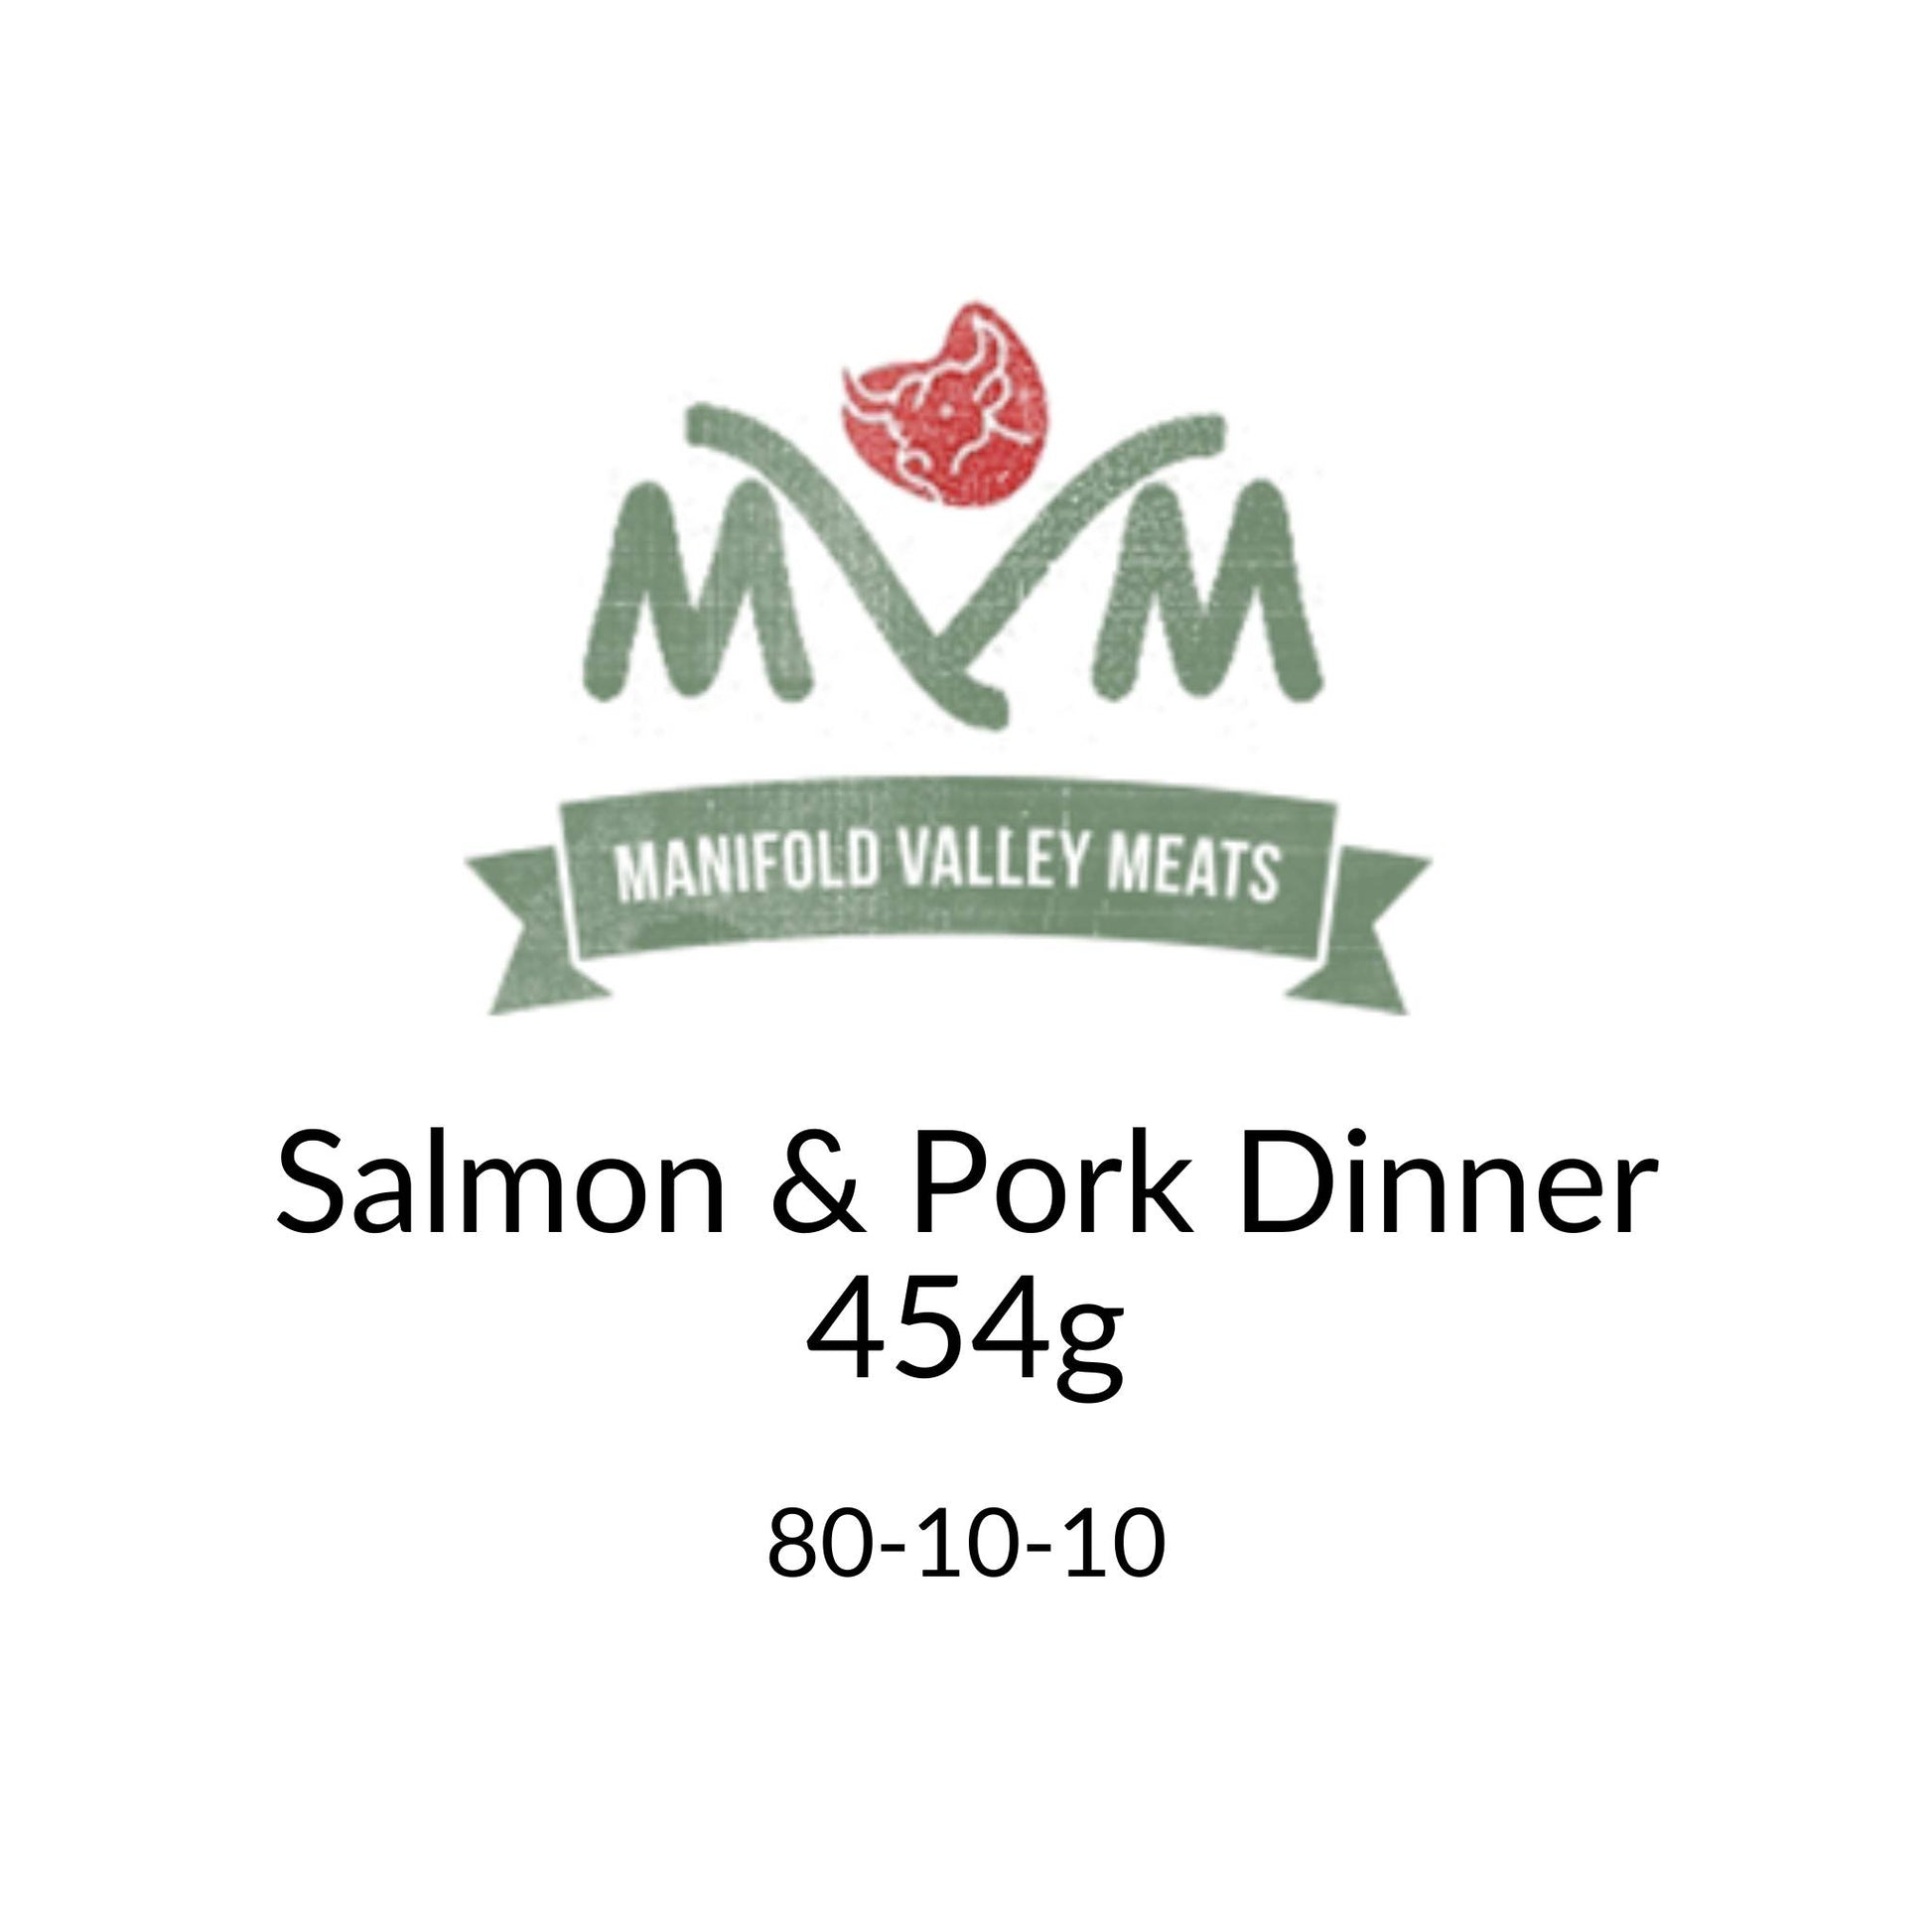 Manifold Valley Meats Salmon and Pork Dinner Raw Dog Food